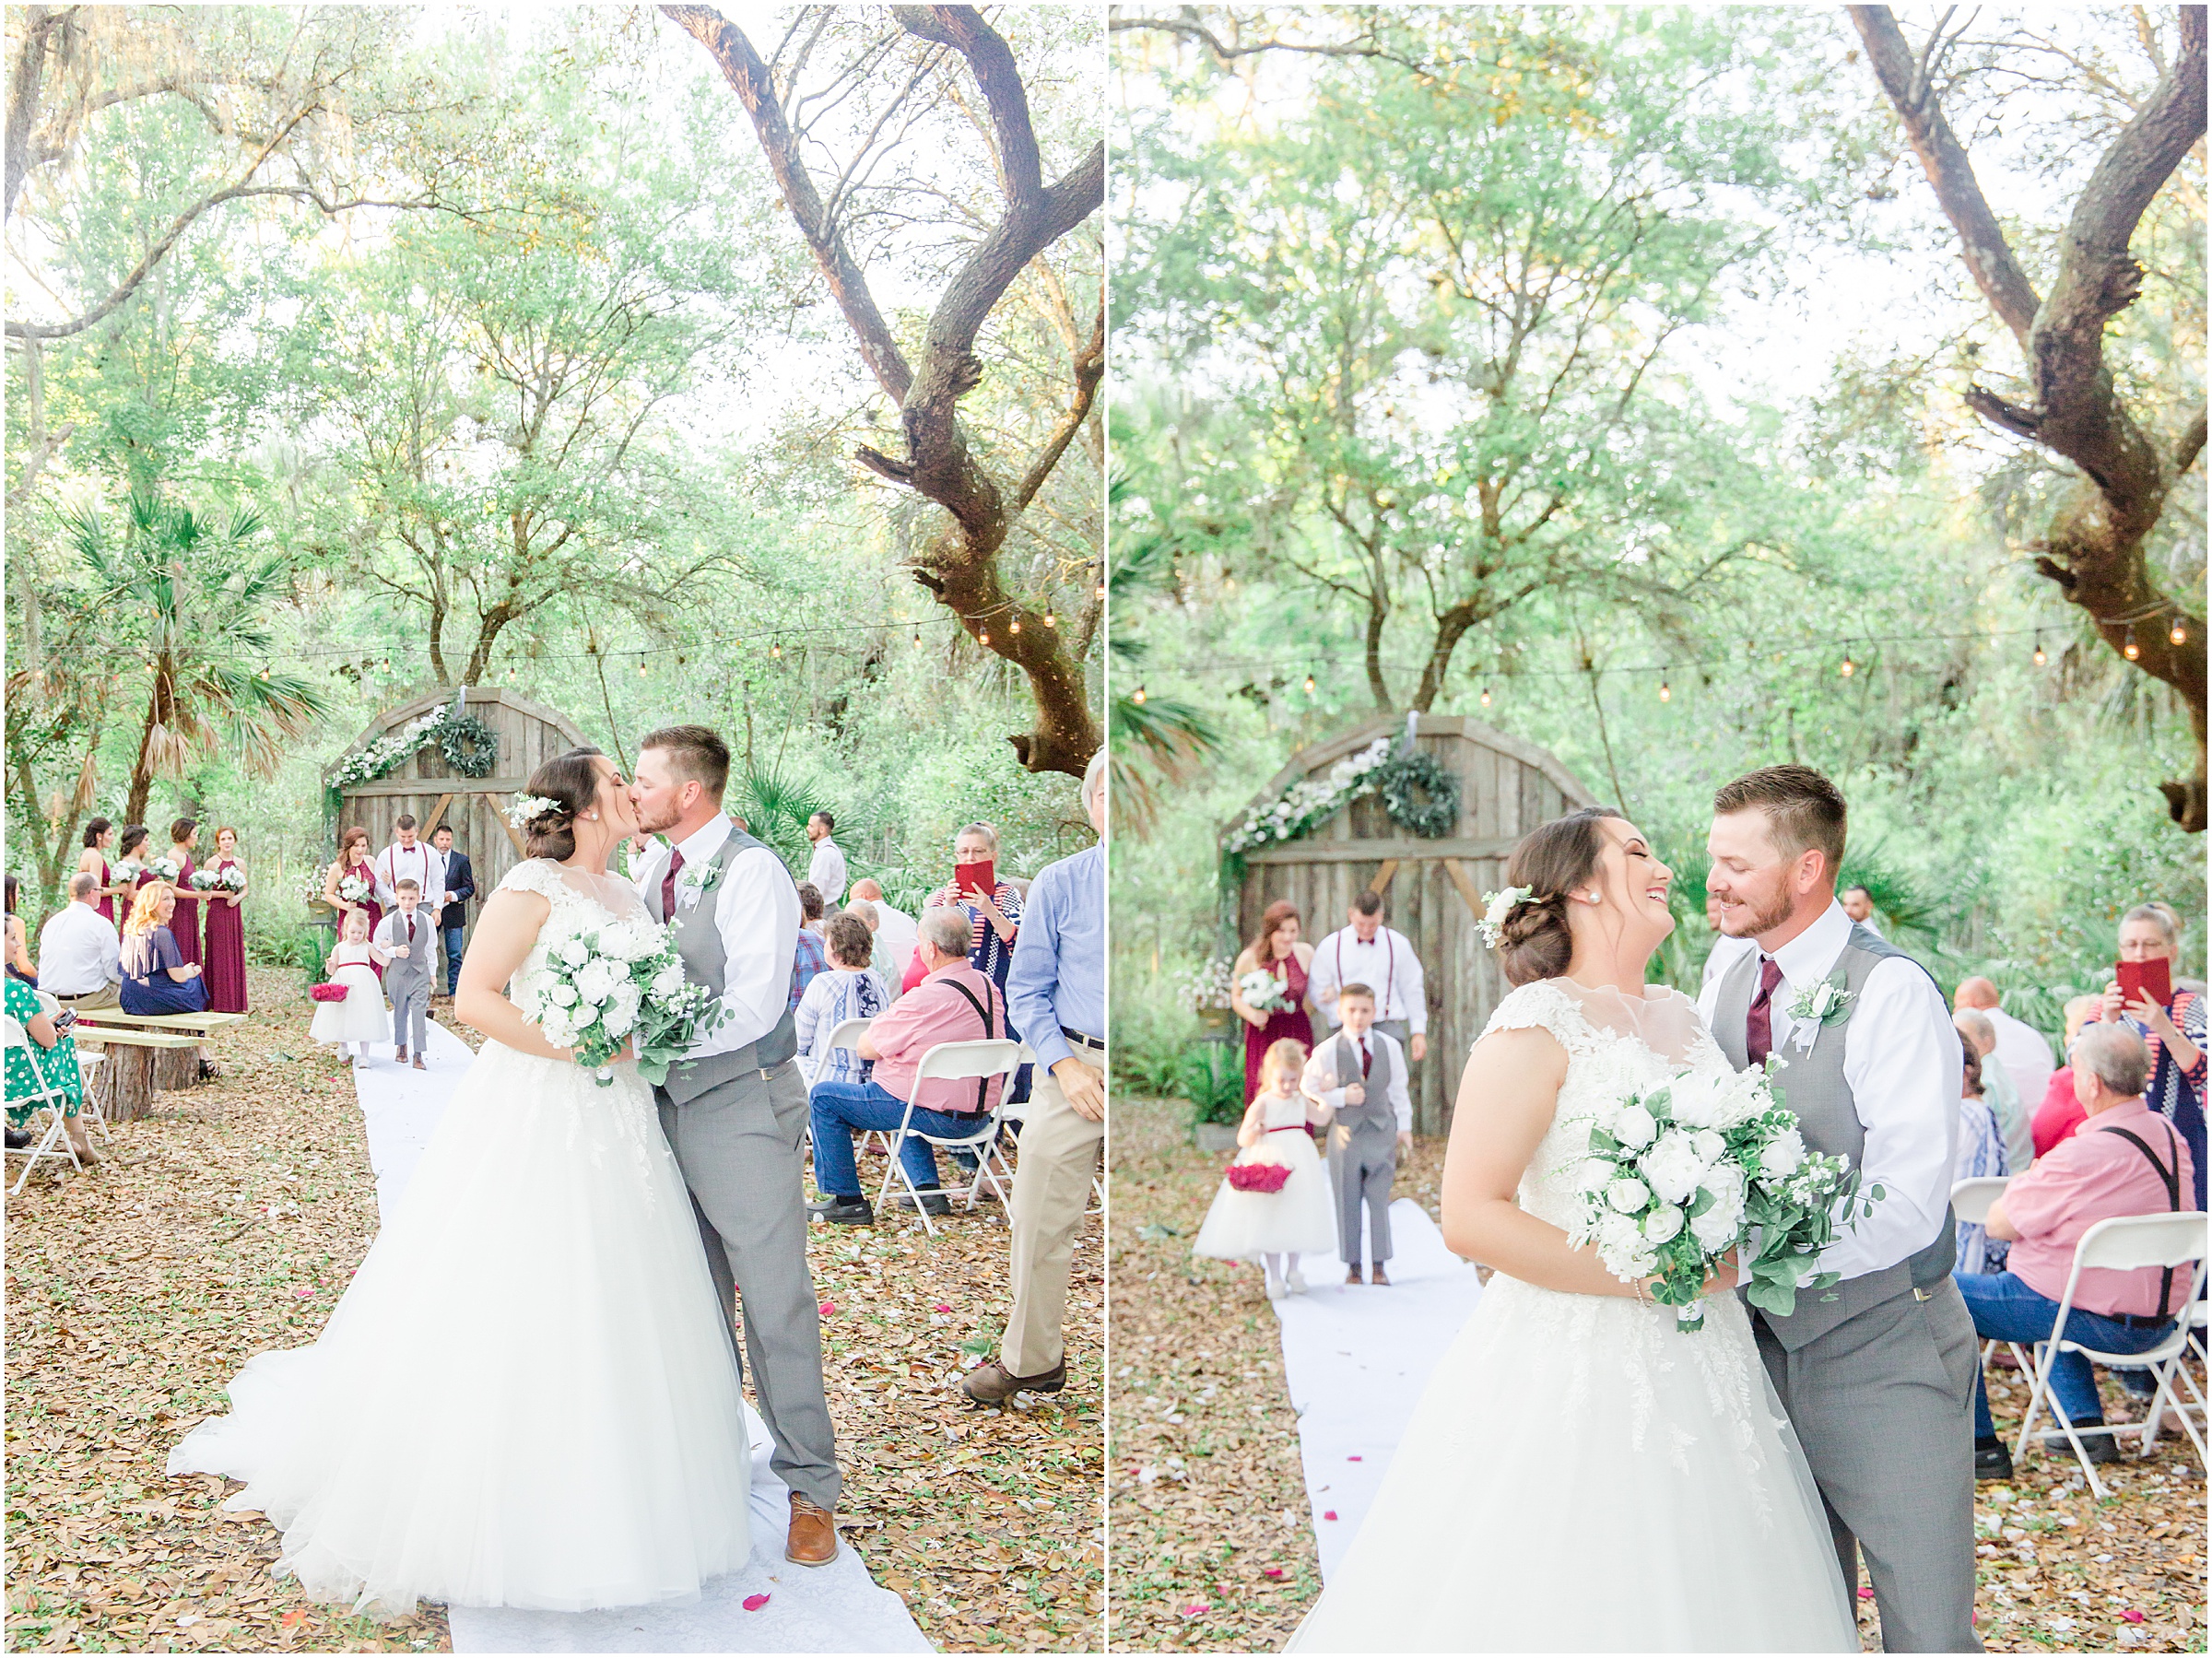 David & Dallas Hodge tied the knot at Arcadia's new rustic venue, Oak Hollow, on Saturday March 2nd surrounded by their closes family and friends.